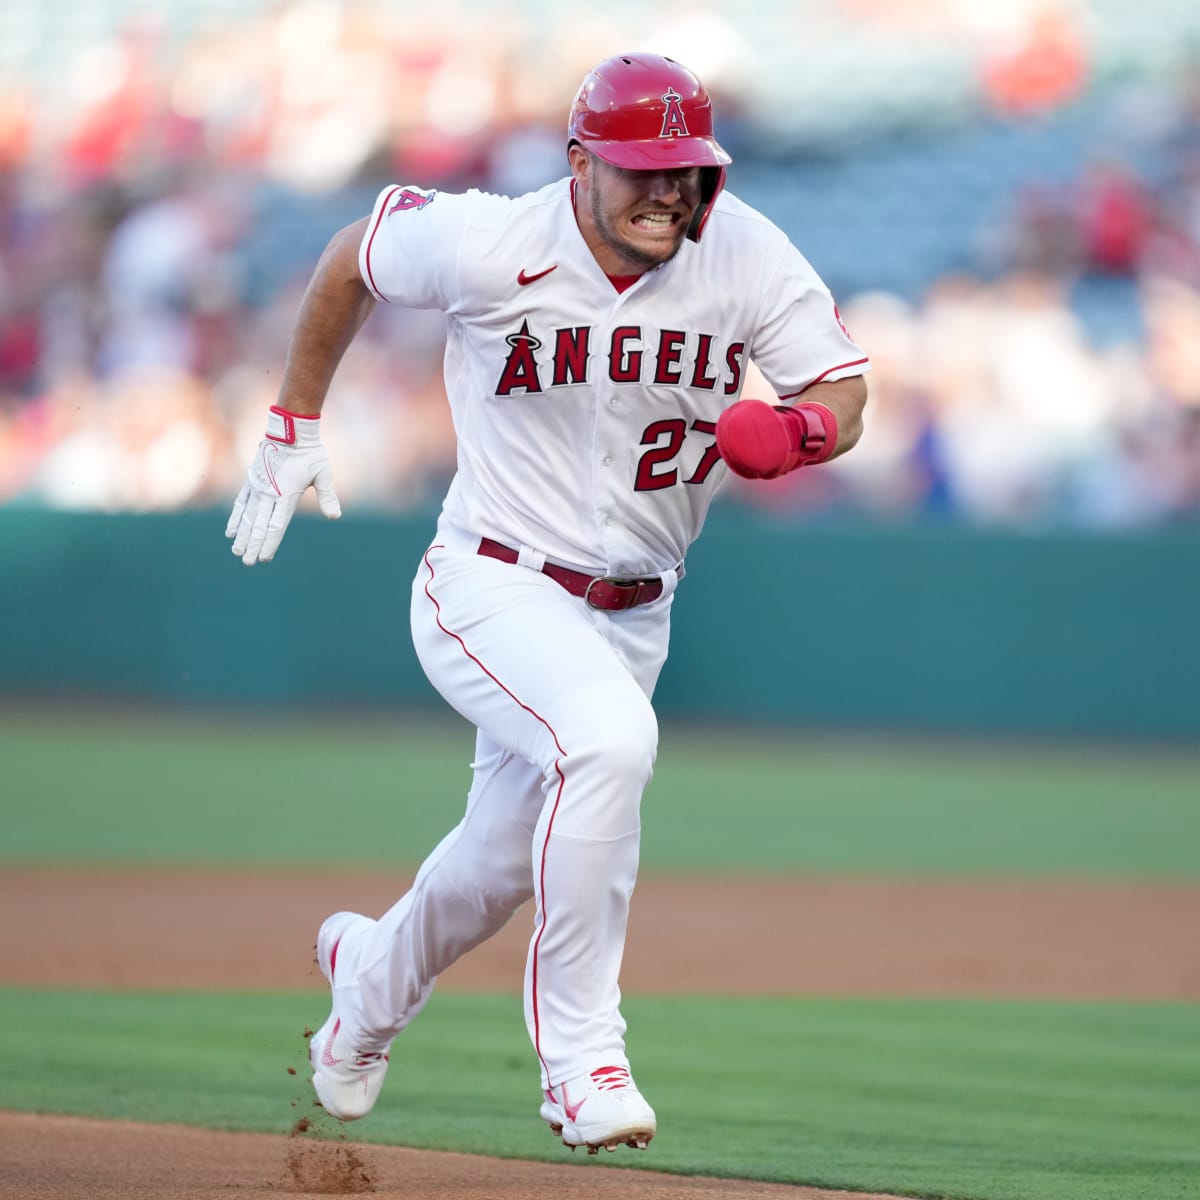 MLB All Star Game voting results: Mike Trout 2nd in AL voting